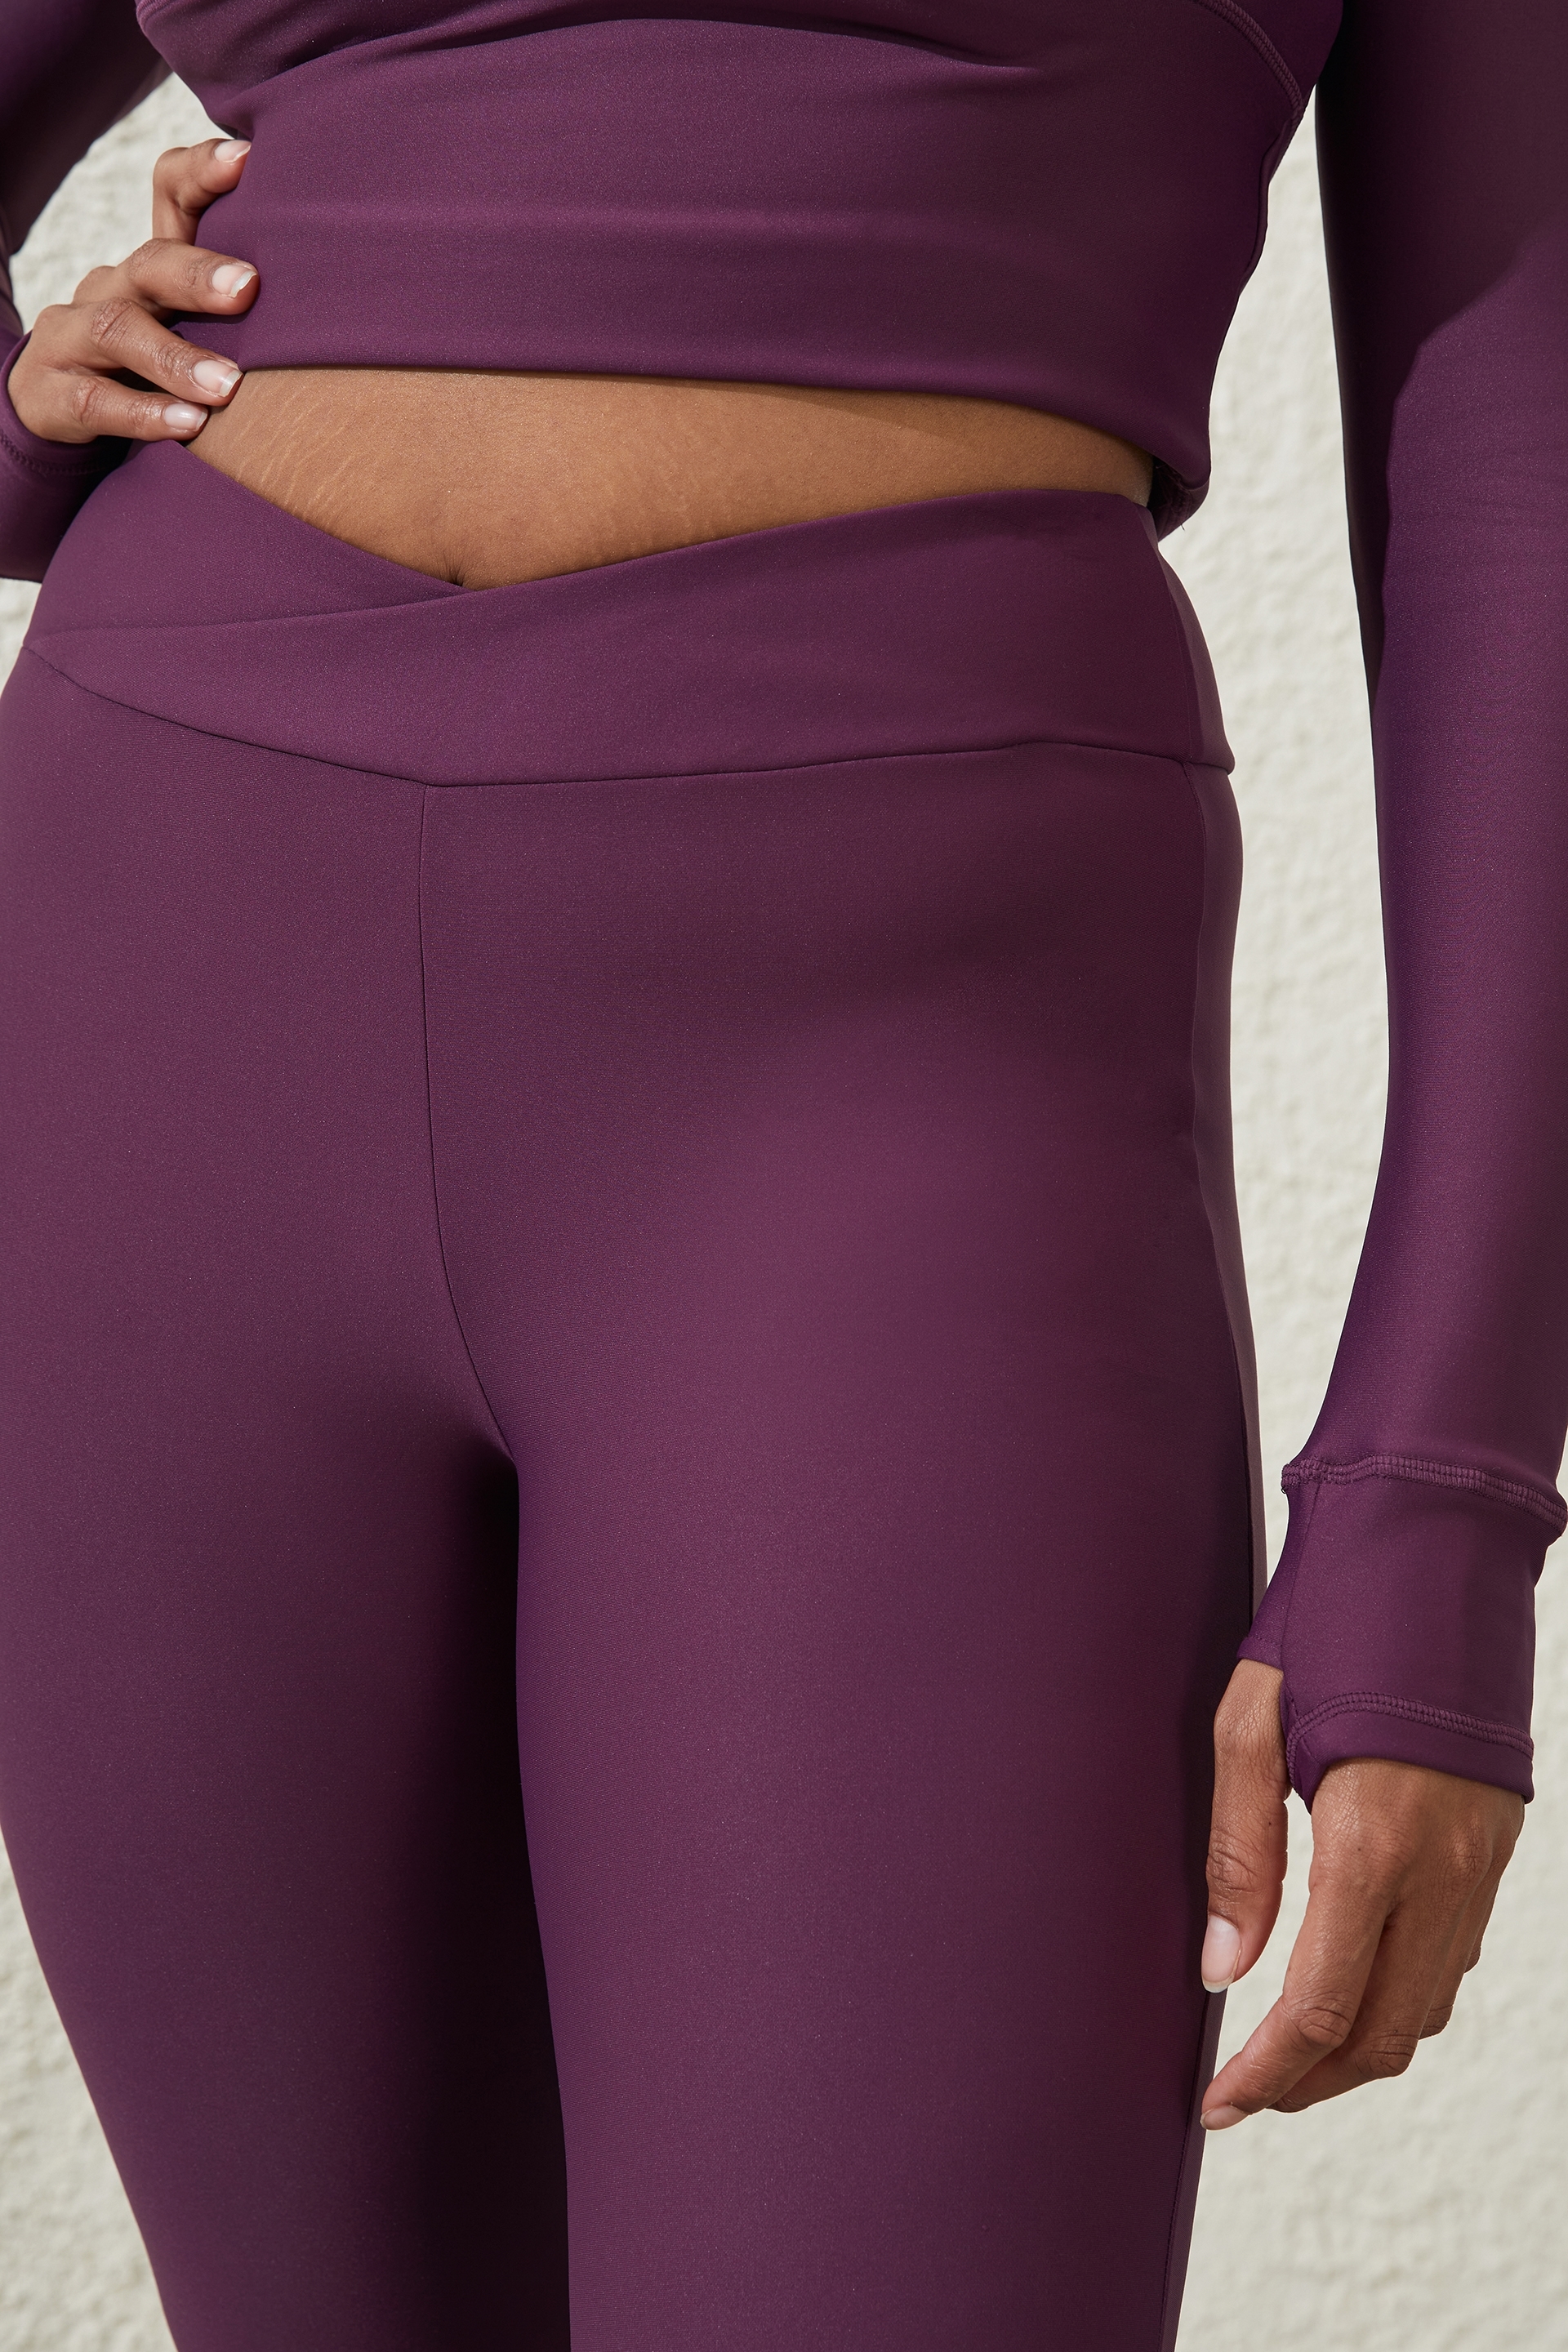 Fleece Lined Full Length Flare Pants by Cotton On Body Active Online, THE  ICONIC